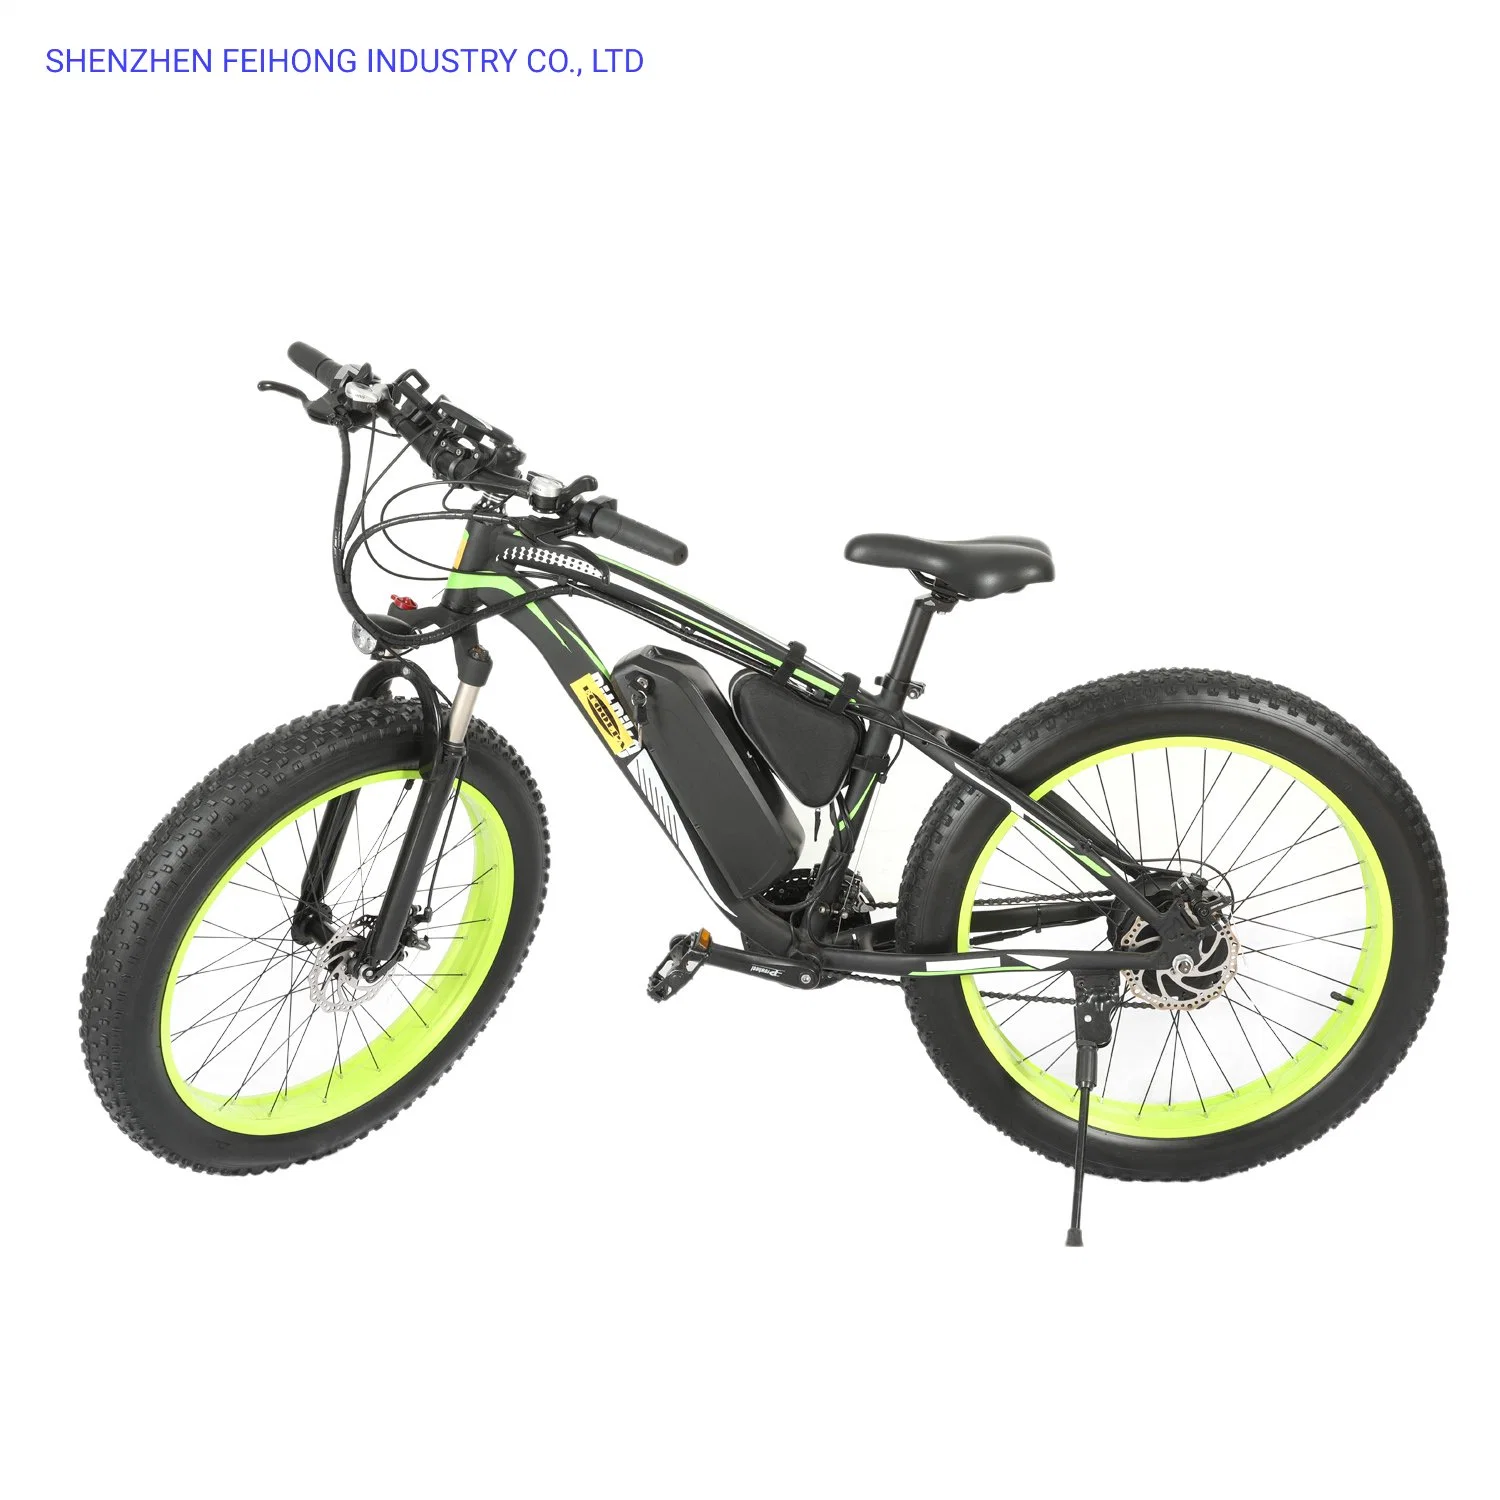 Aluminum Frame 26 Inch Motorcycle Electric Scooter Bicycle Electric Bike Electric Motorcycle Scooter Motor Scooter Electric Fat Bike 48V 10ah Battery 350W Motor